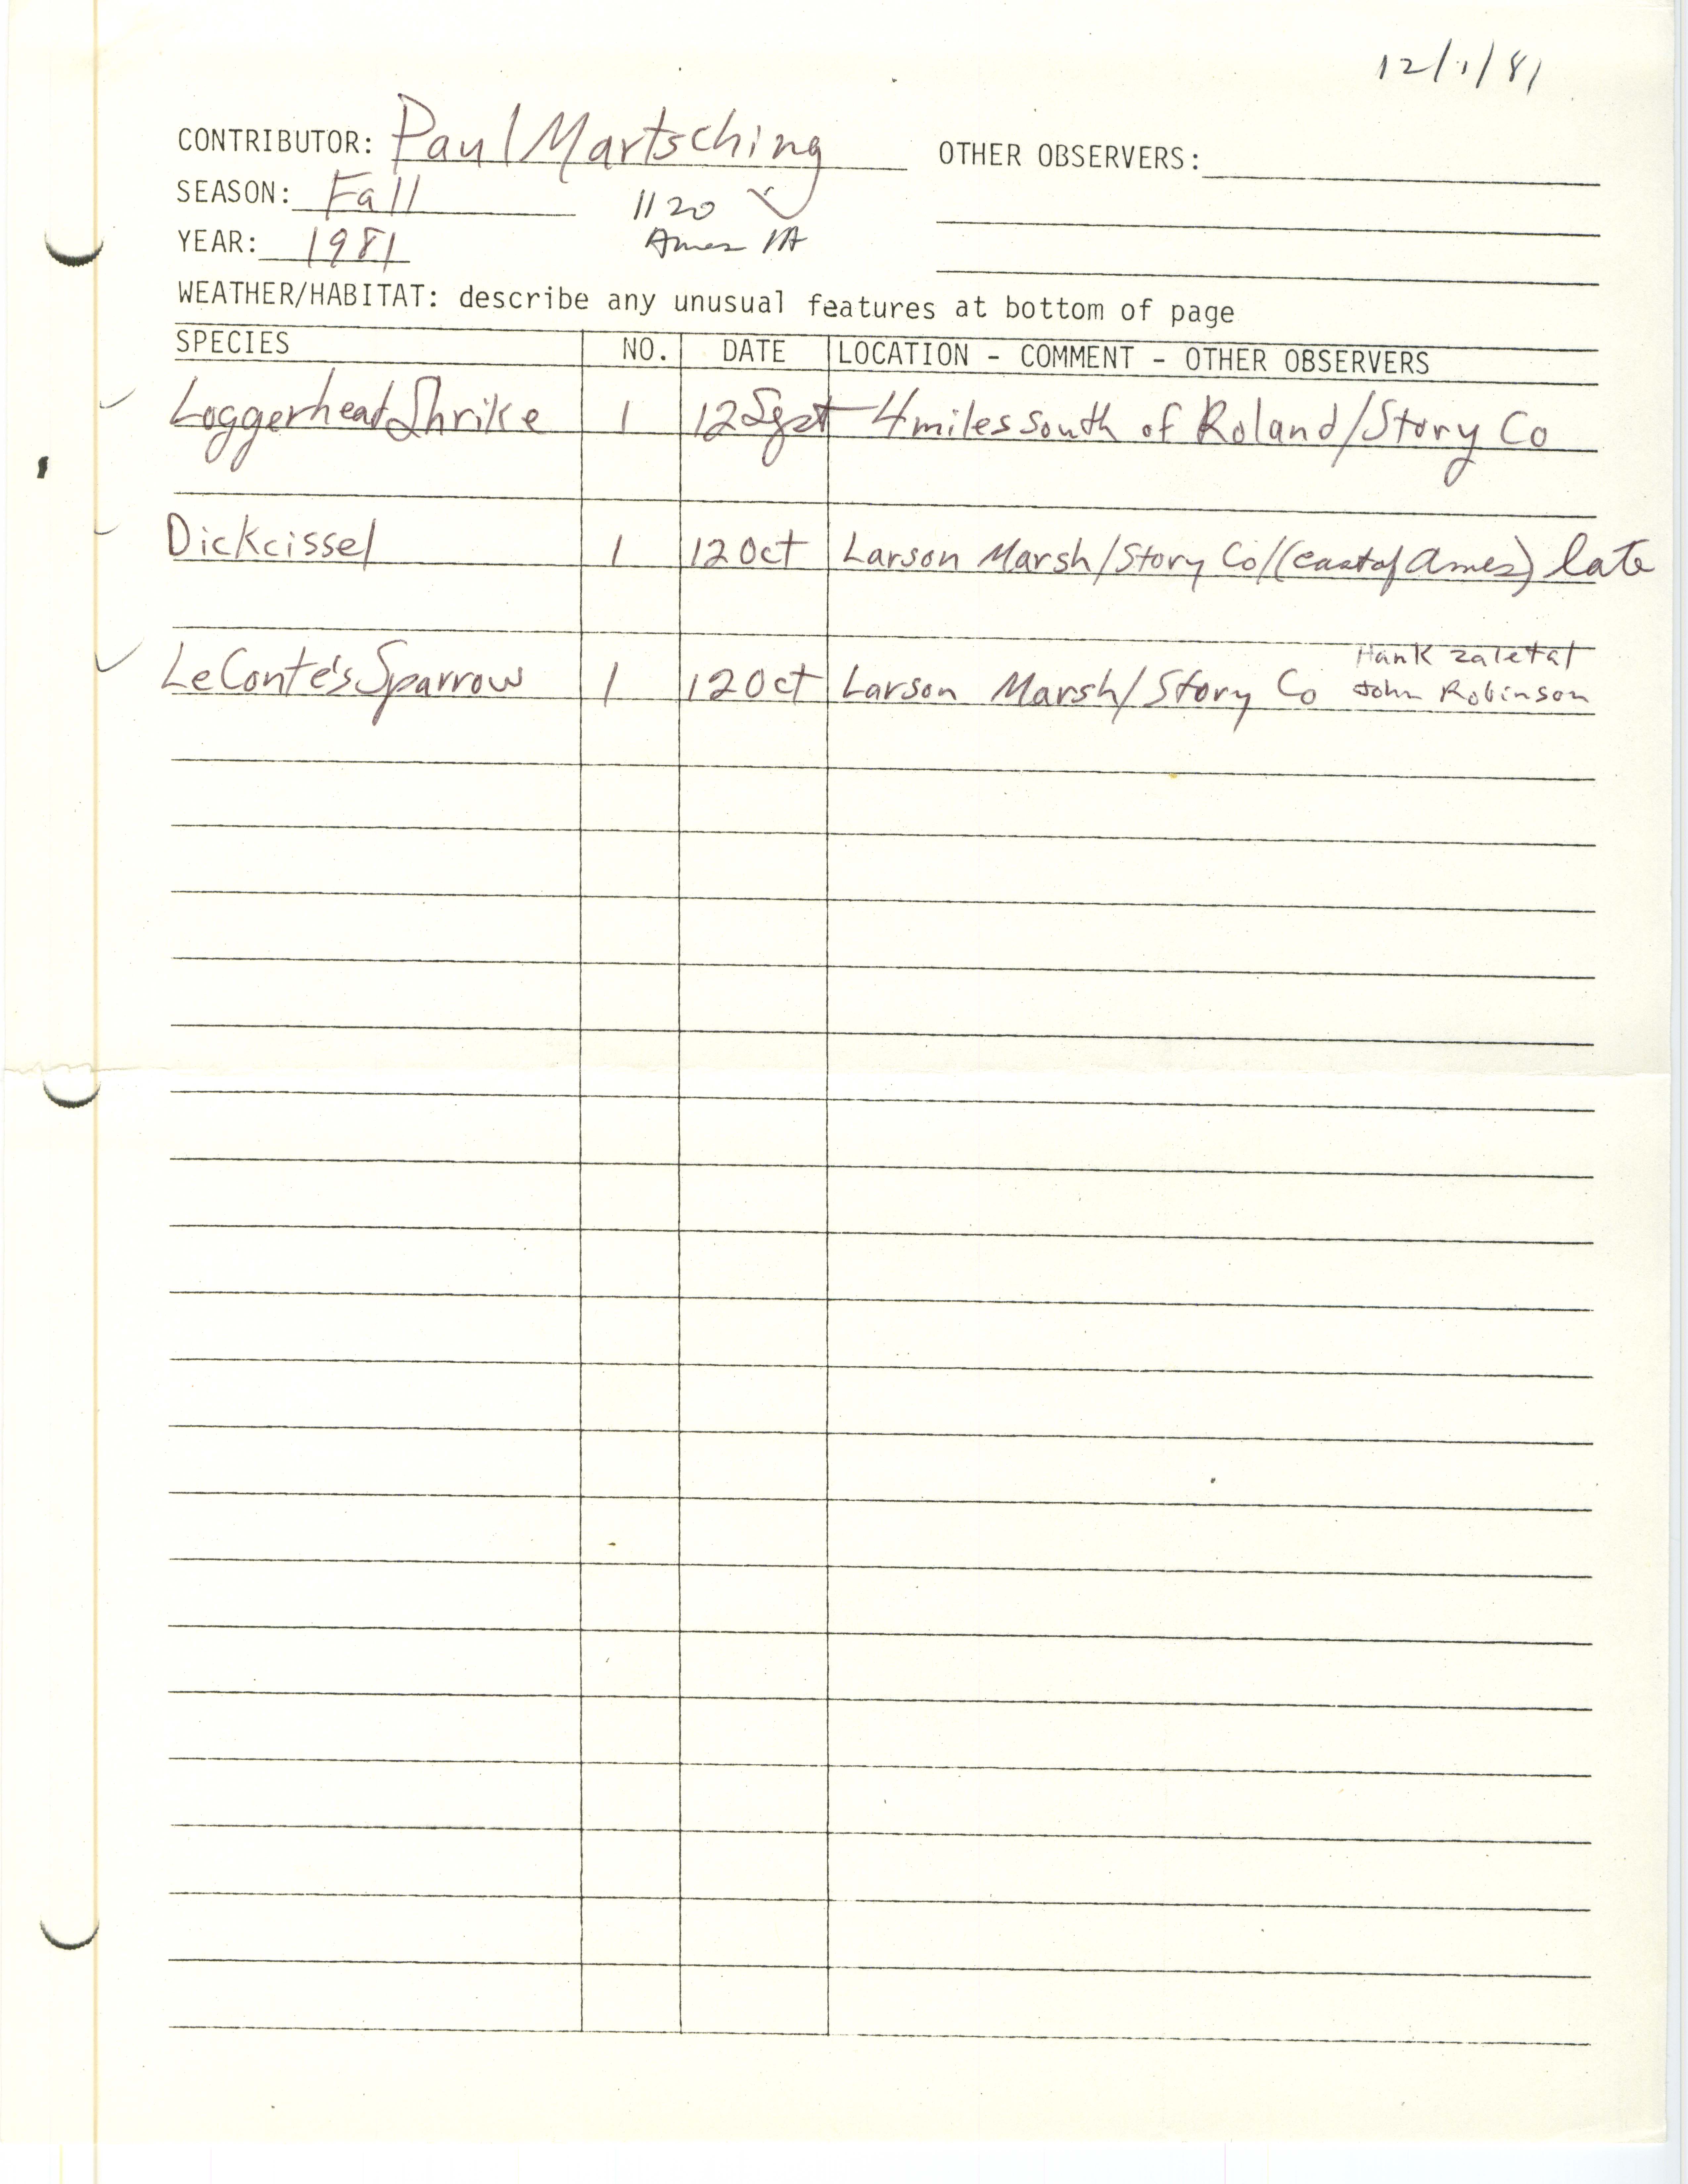 Field notes contributed by Paul Martsching, December 1, 1981